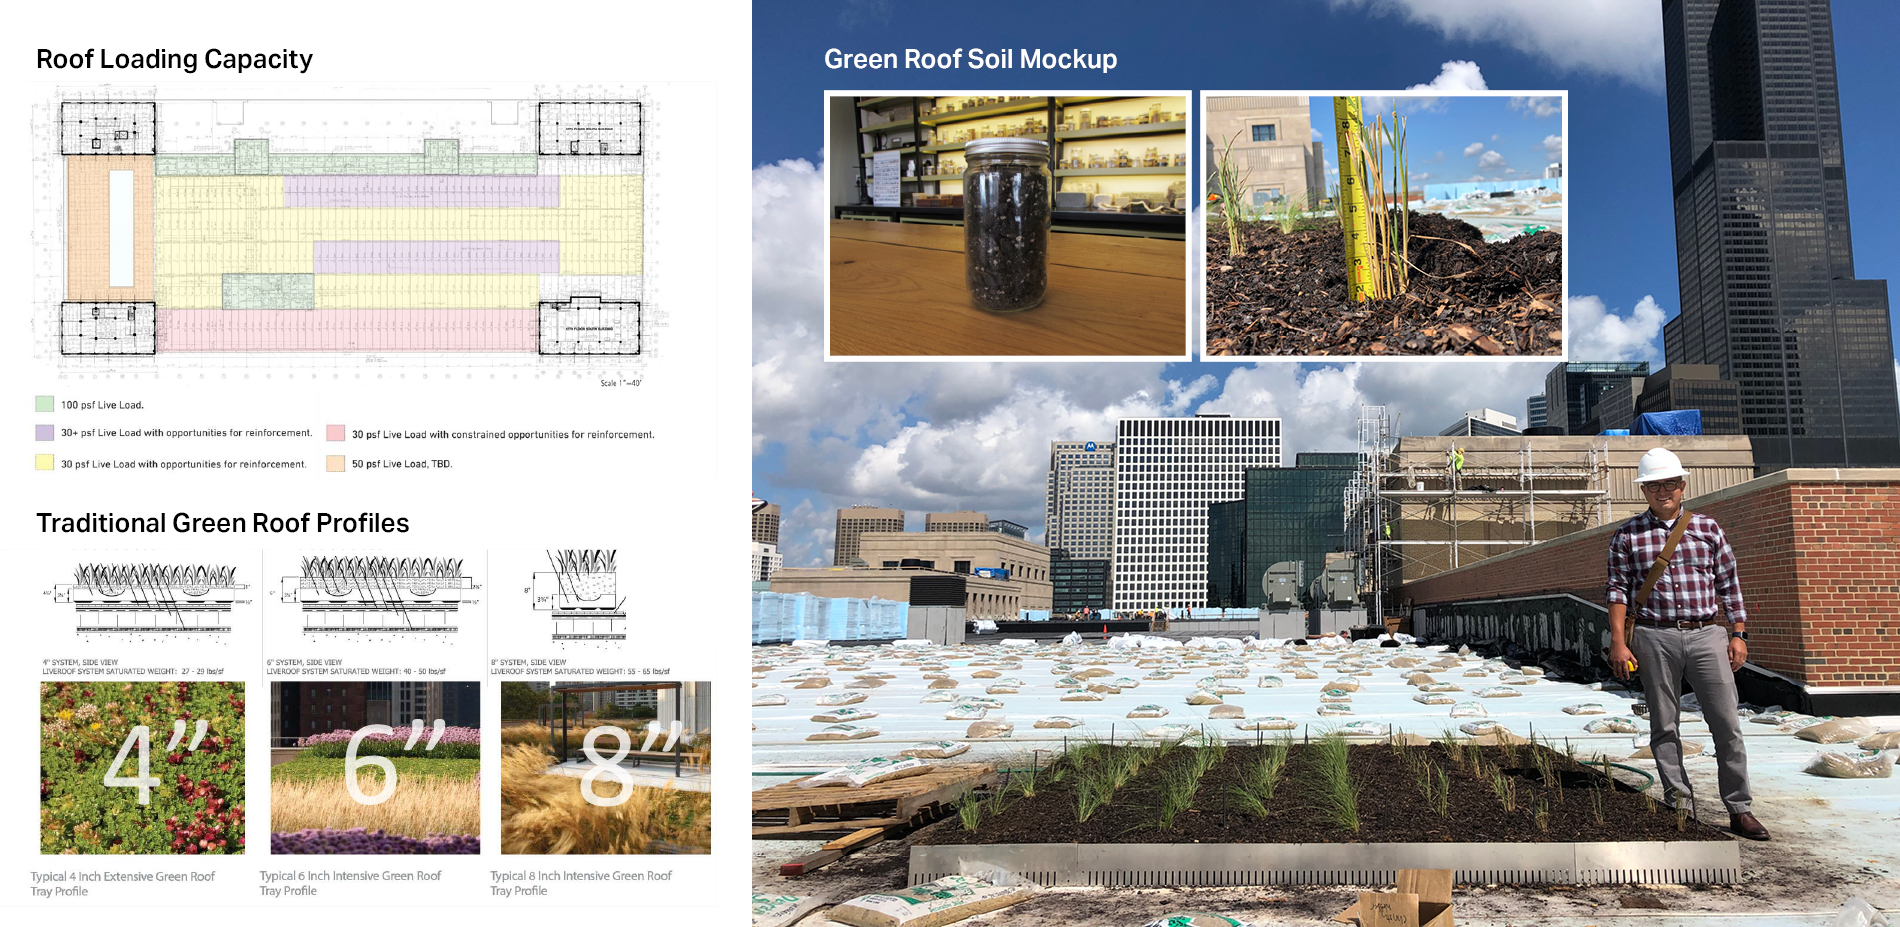 Roof Loading Capacity & Innovative Green Roof Soil Solutions